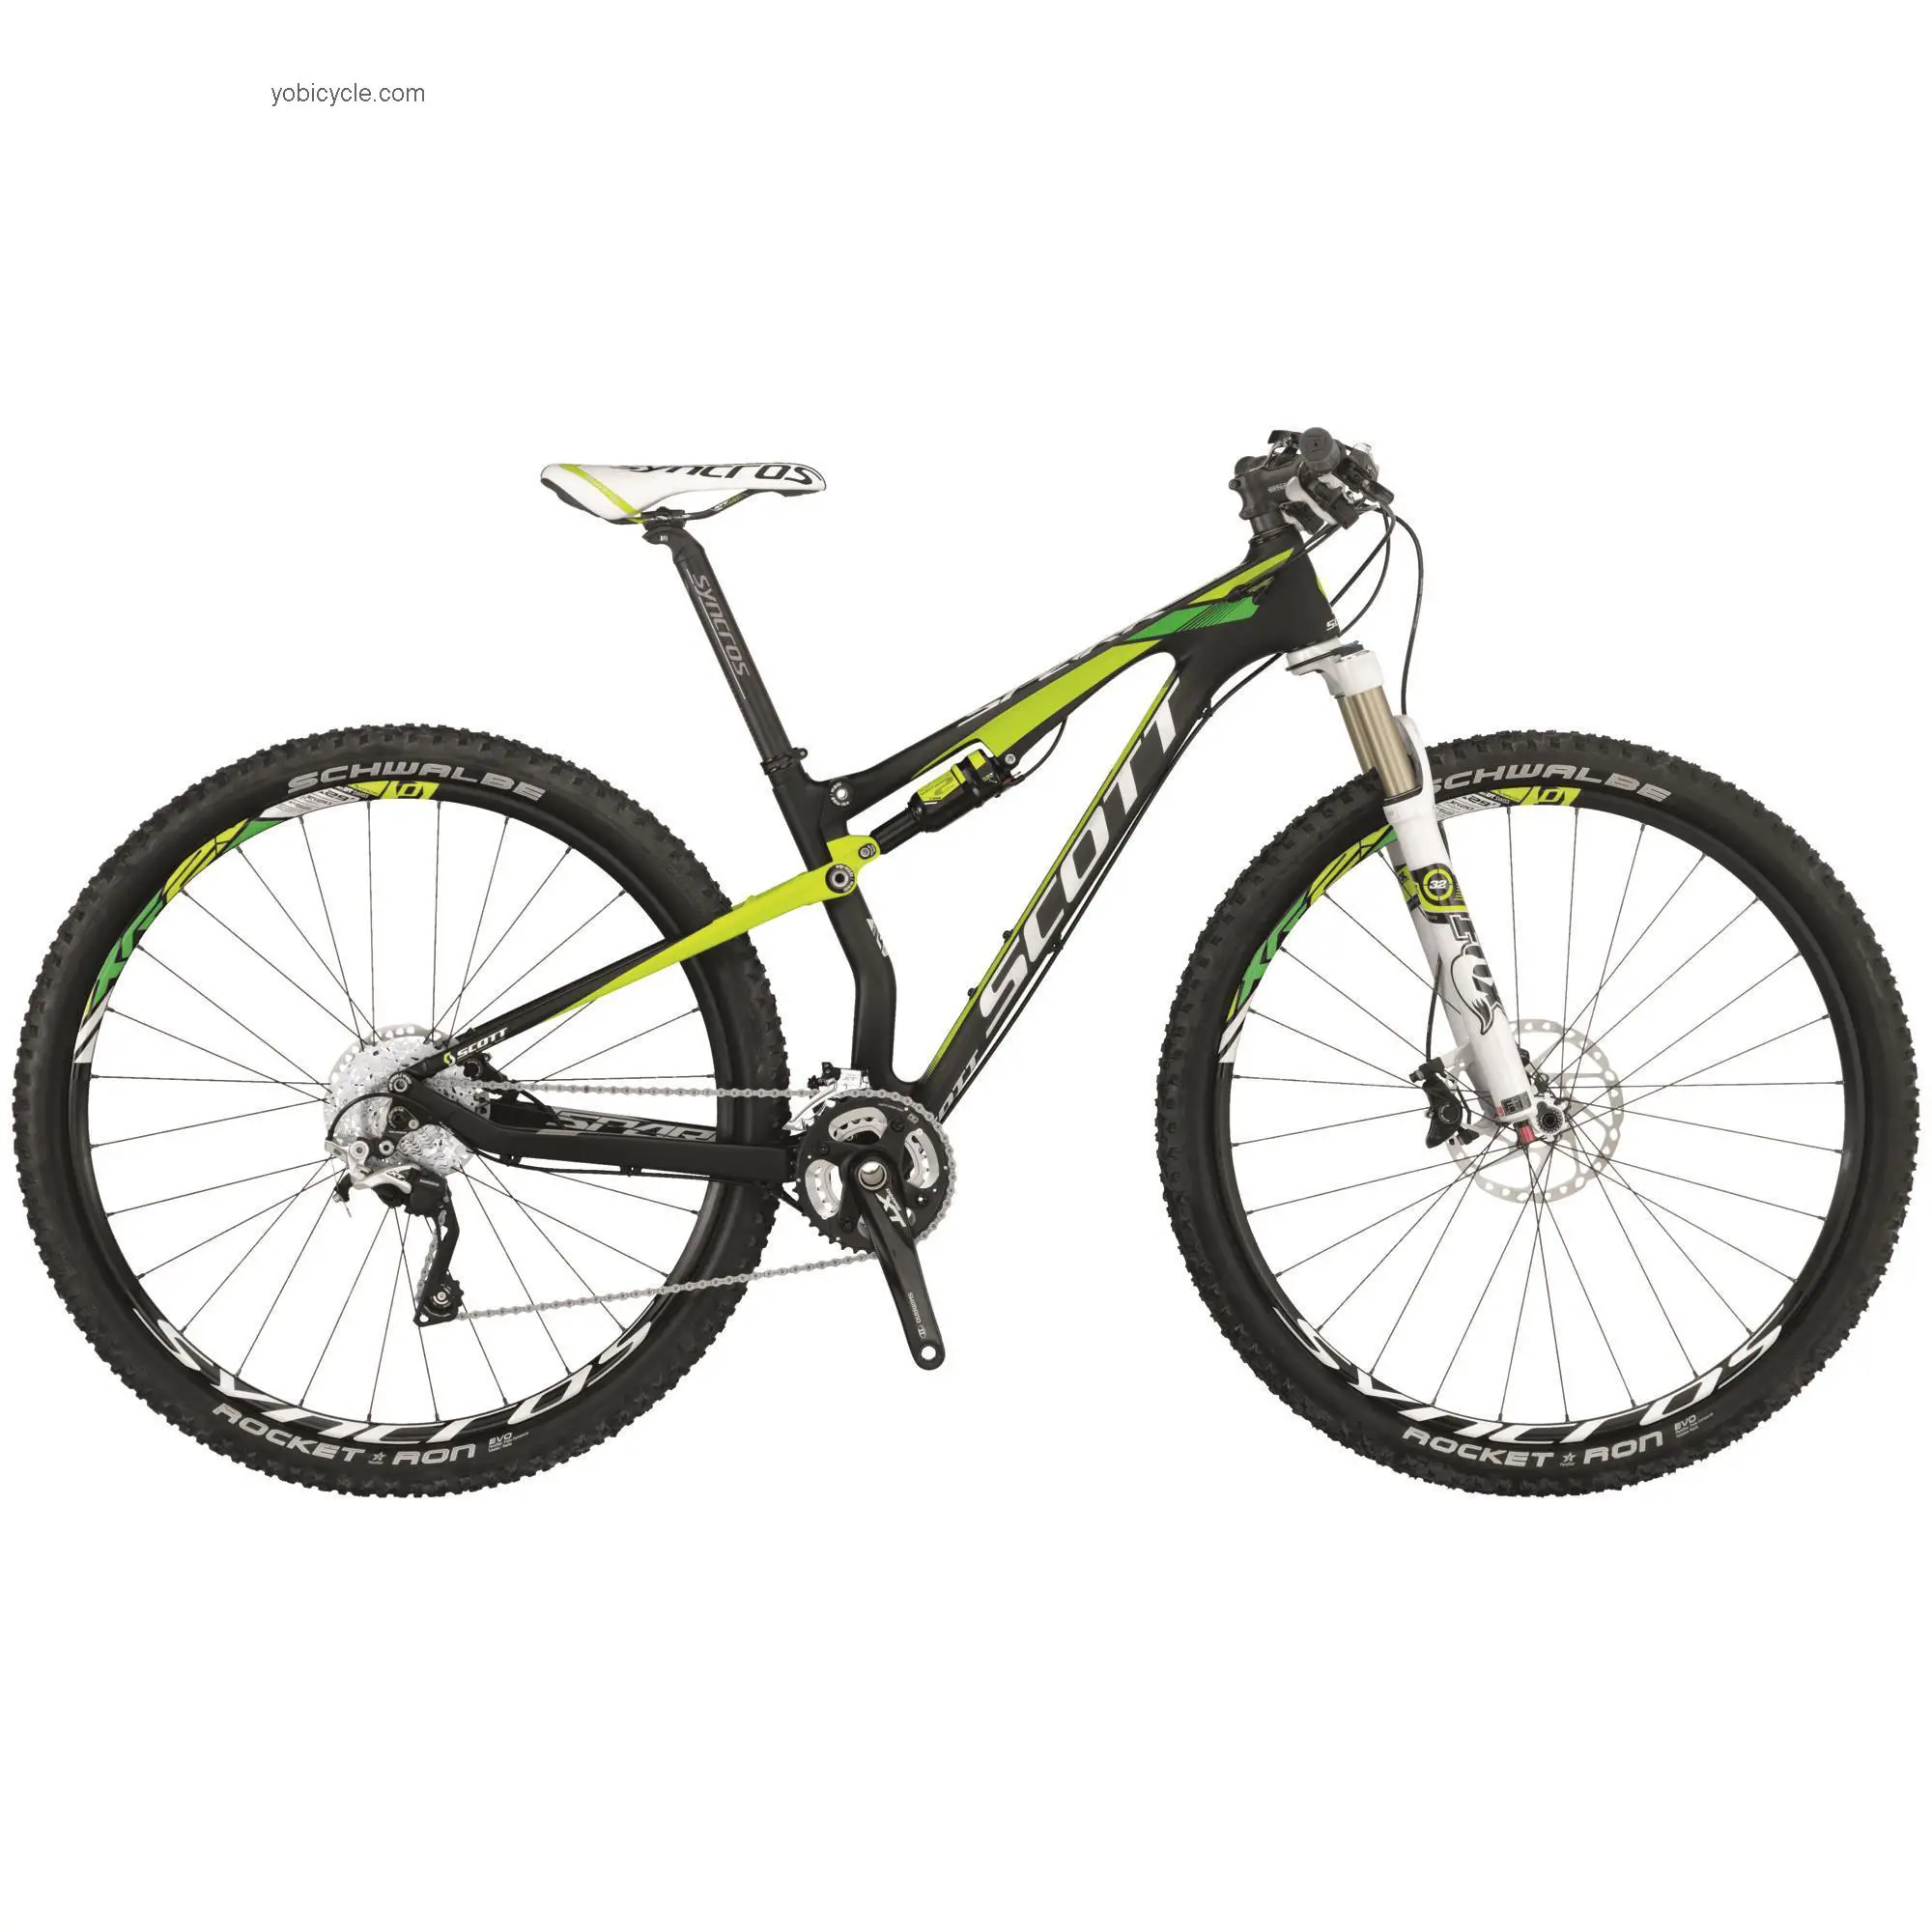 Scott Contessa Spark 900 RC competitors and comparison tool online specs and performance